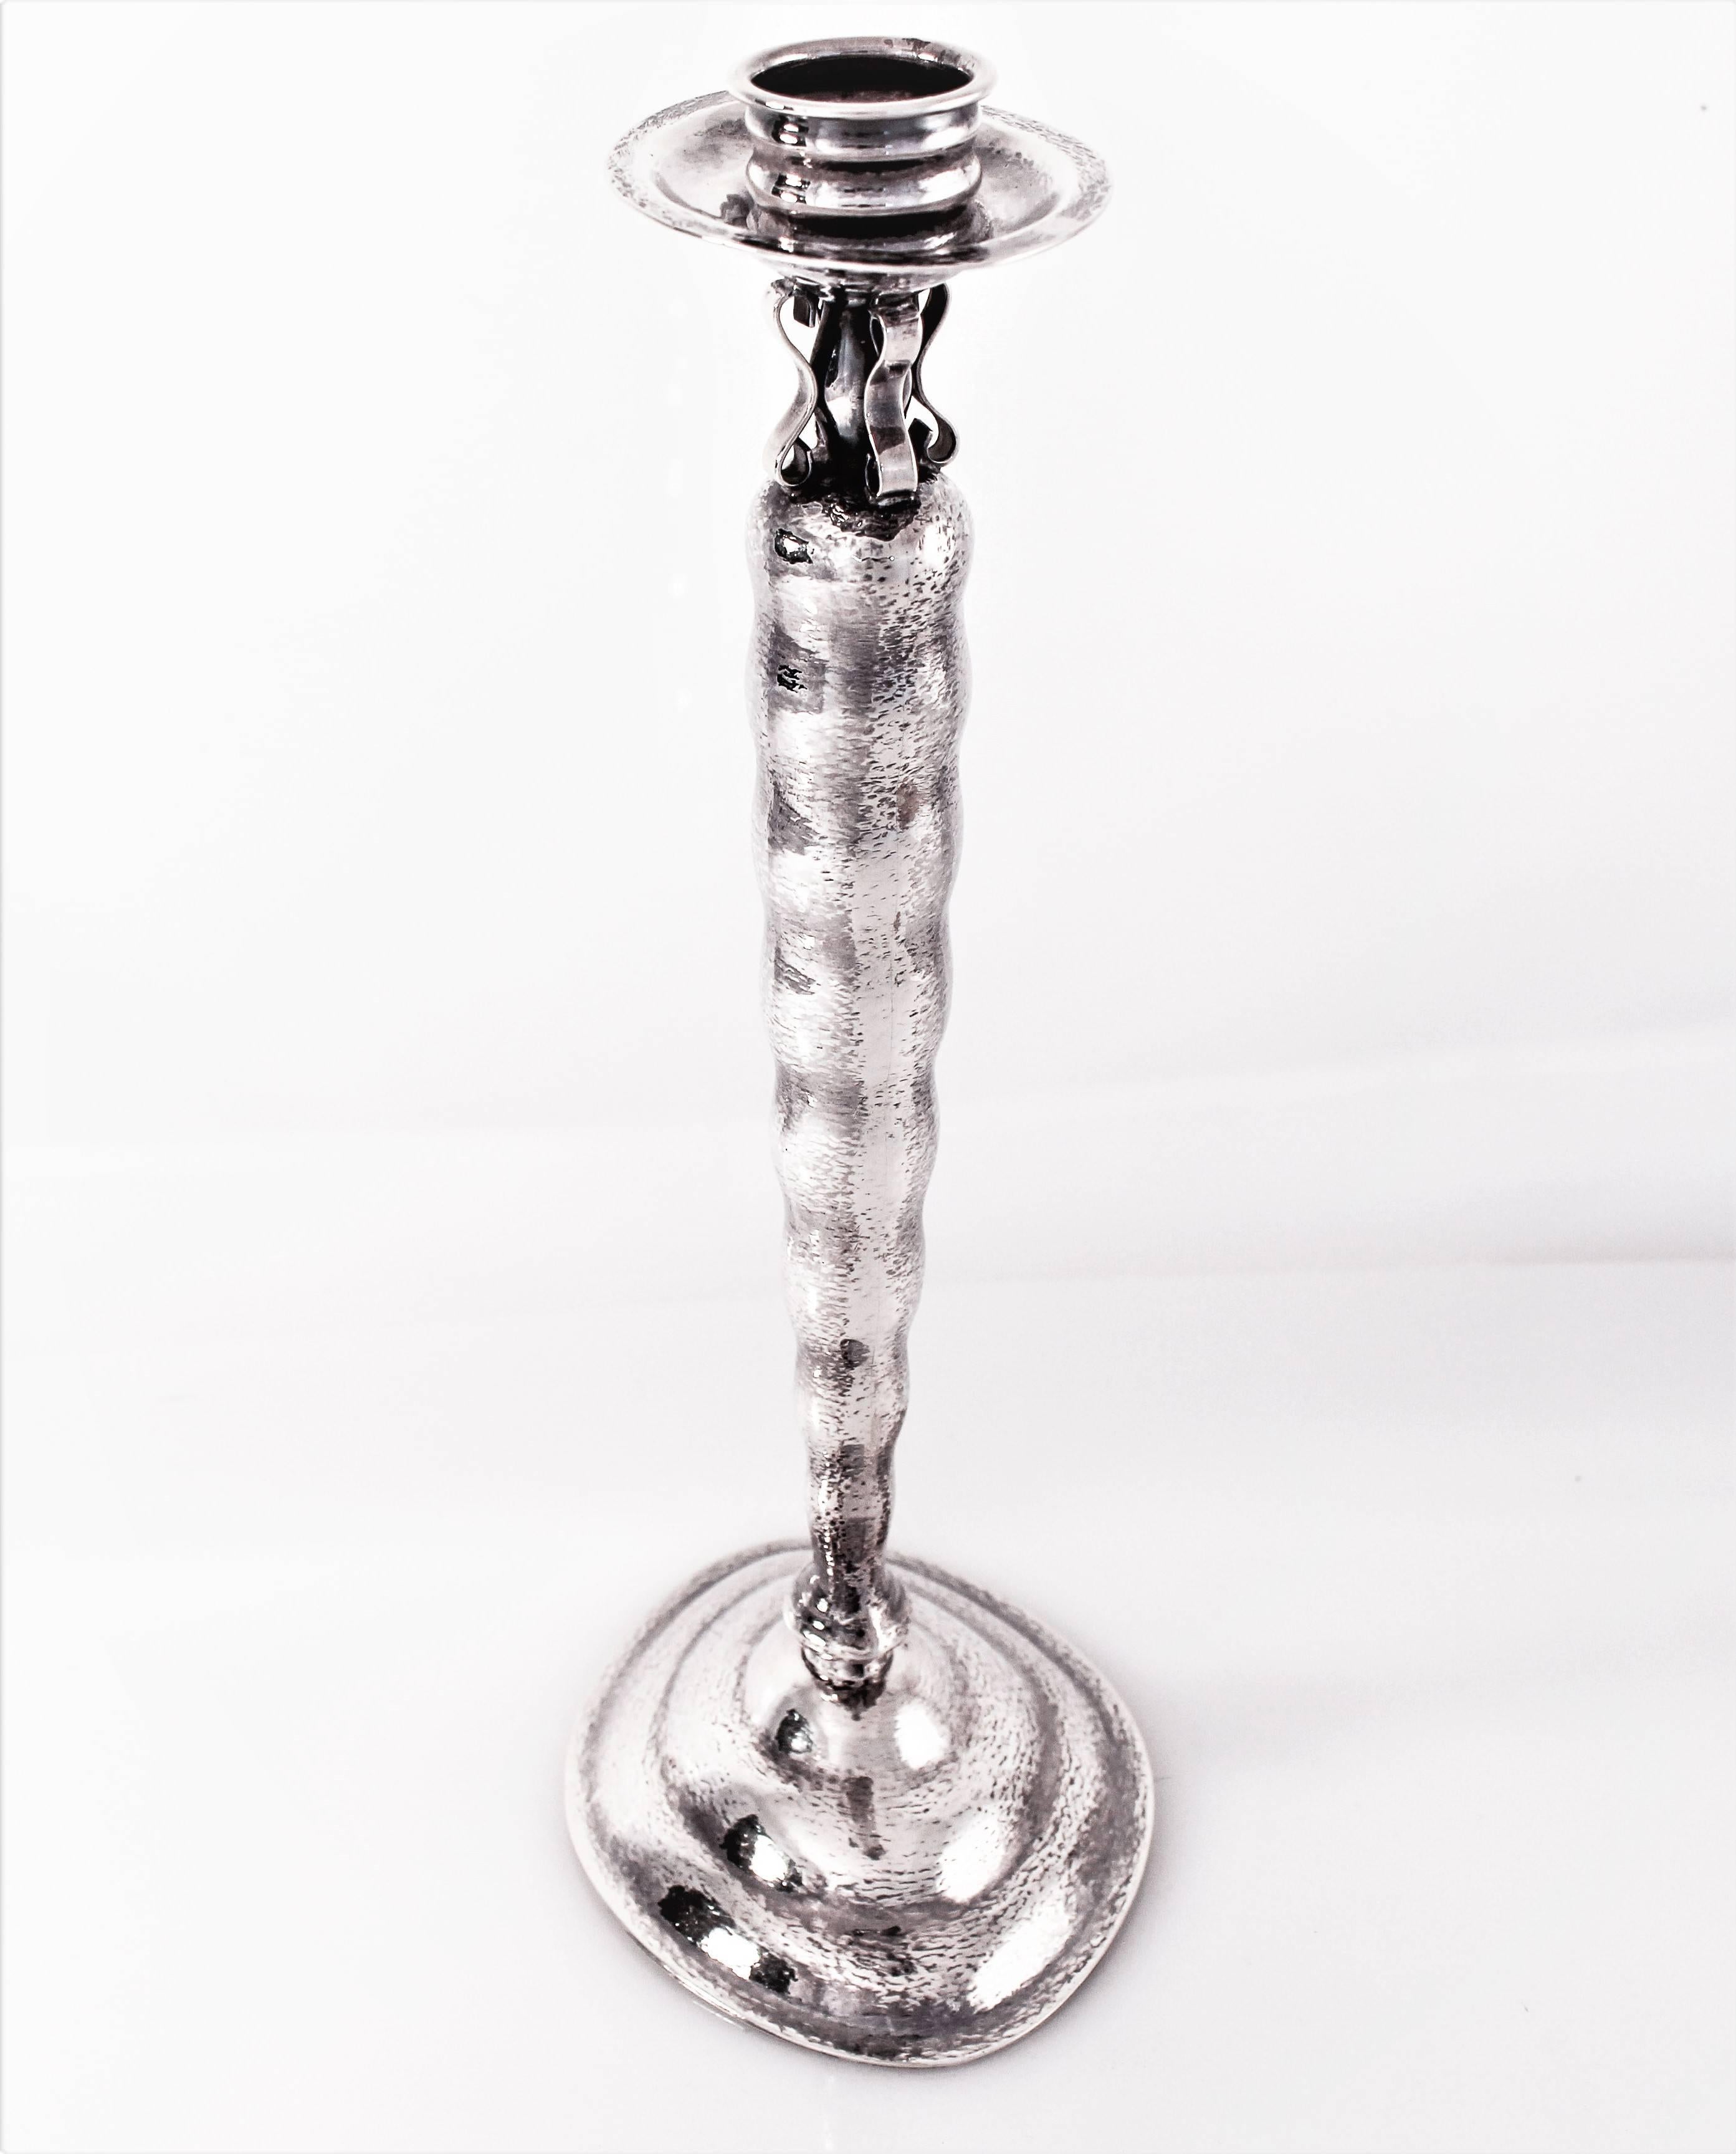 If you like drawing outside the box, if you don’t want to have what everyone else has, keep reading. These candlesticks are uber-cool; they have a hammered futuristic design. Oval base and top with ridges along the entire body. There are also four